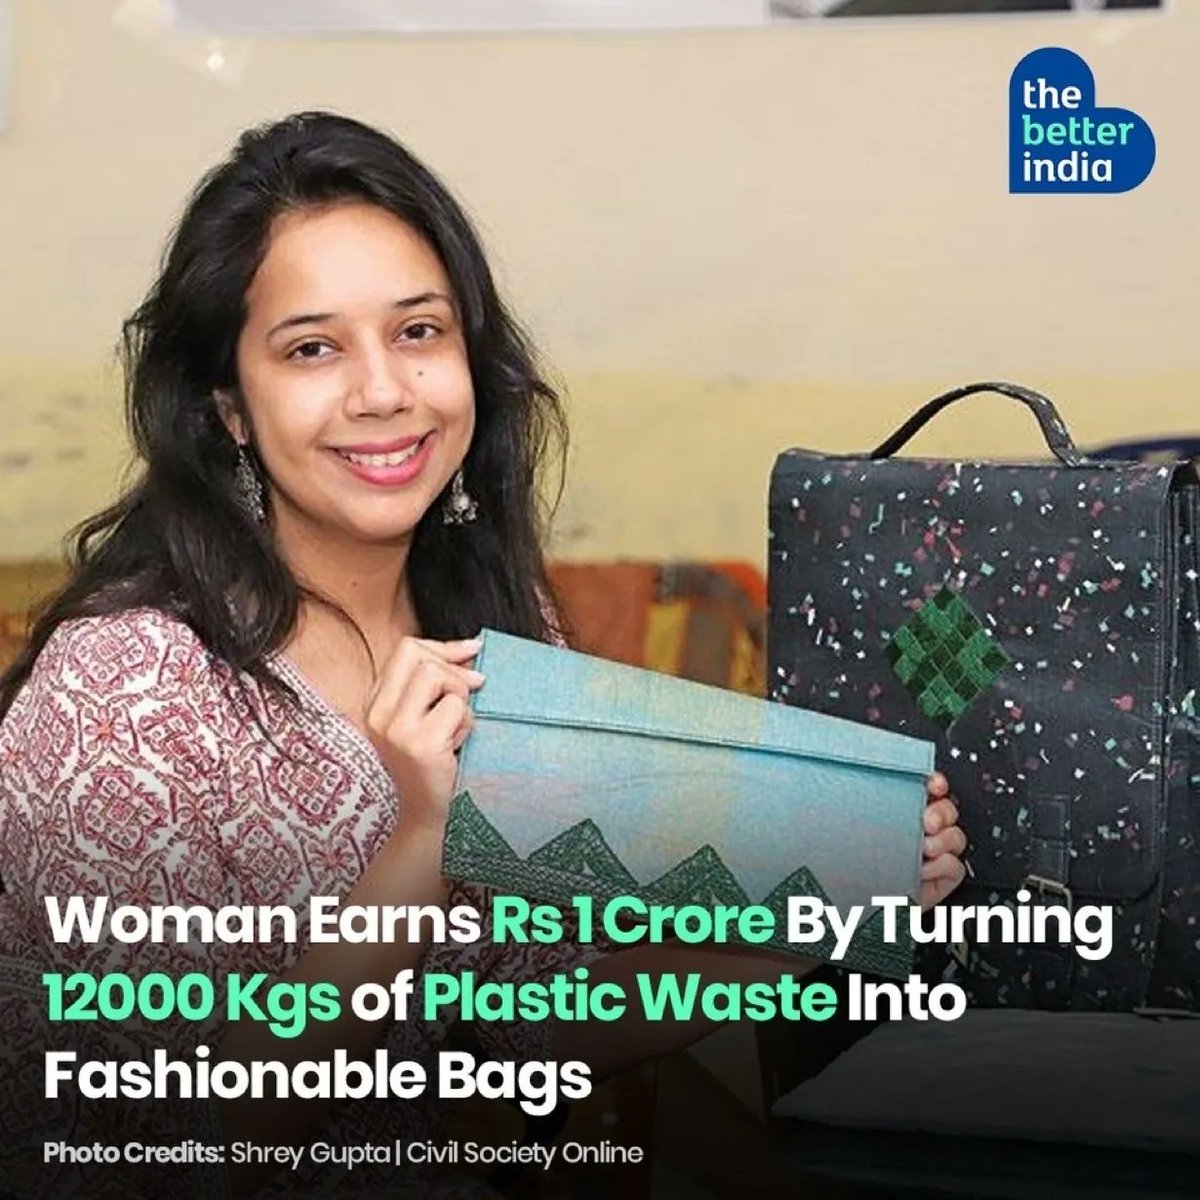 Well done! Delhi-based 🇮🇳 woman entrepreneur Kanika Ahuja launched Lifaffa to help upcycle plastic waste into bags, laptop sleeves, mats & fashion accessories so that it doesn’t end up in landfills & has been able to convert 12,000 kgs of plastic into upcycled products.